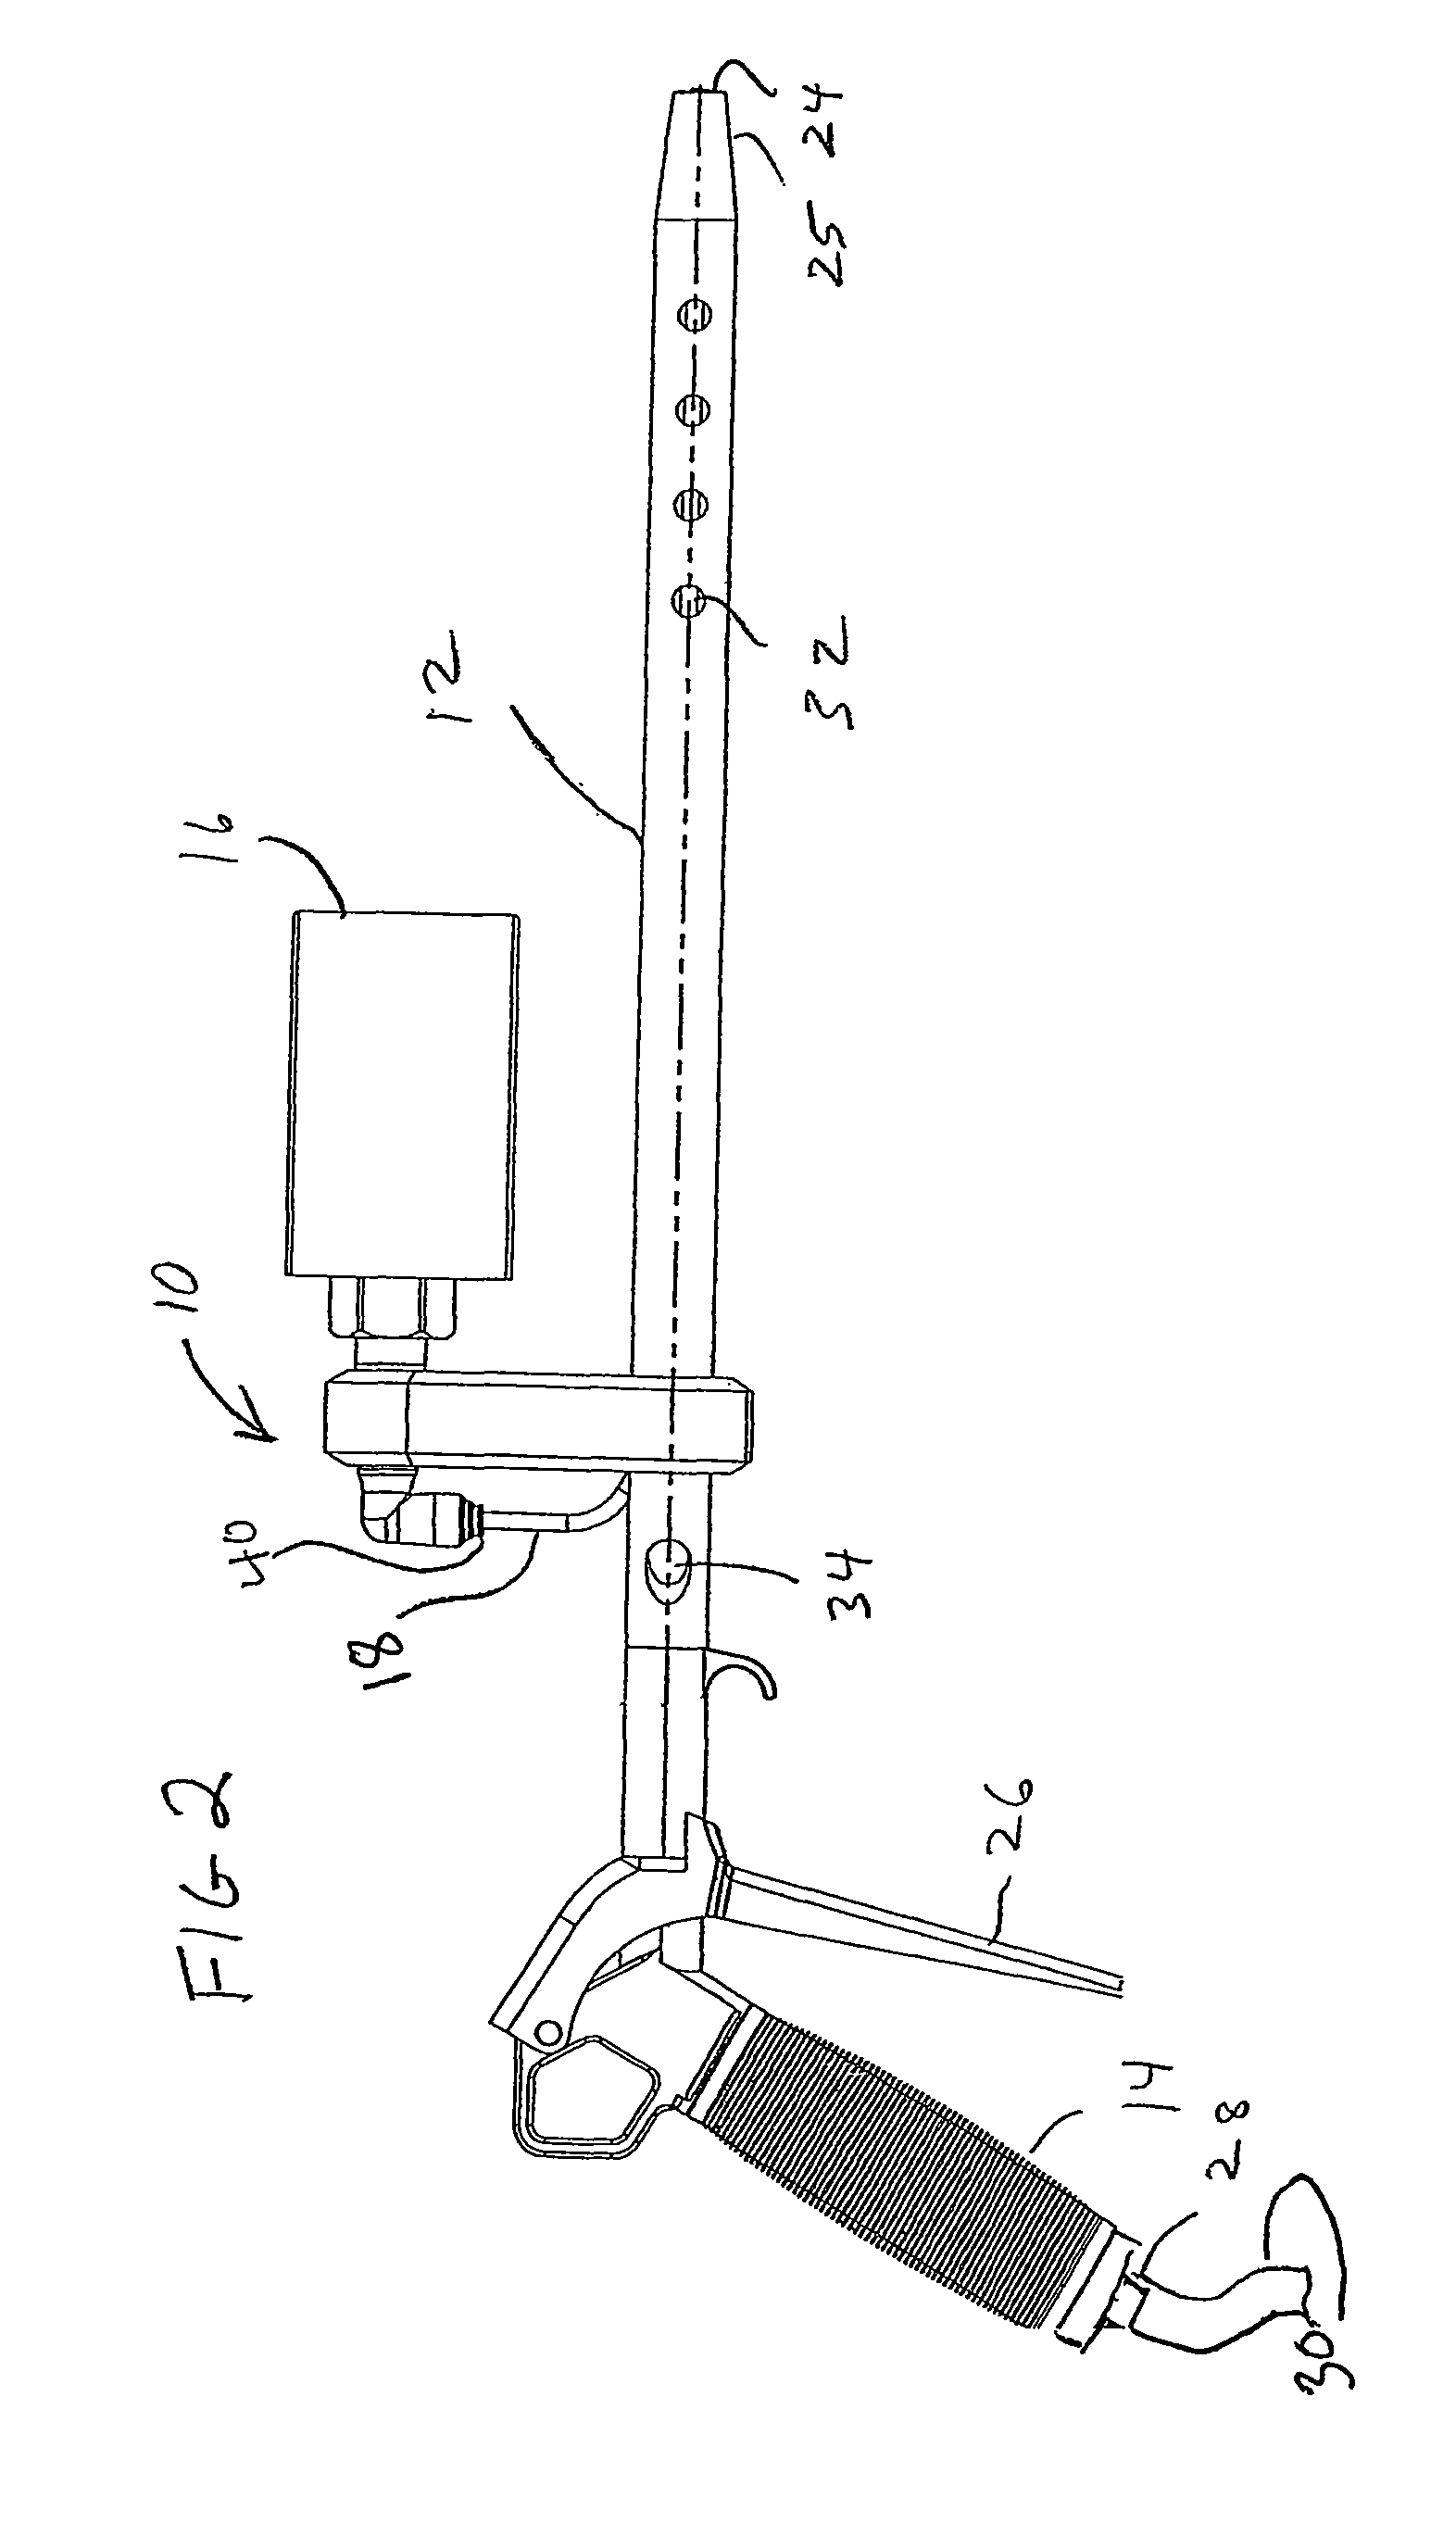 Inflation probe device with measurement of inflation pressure